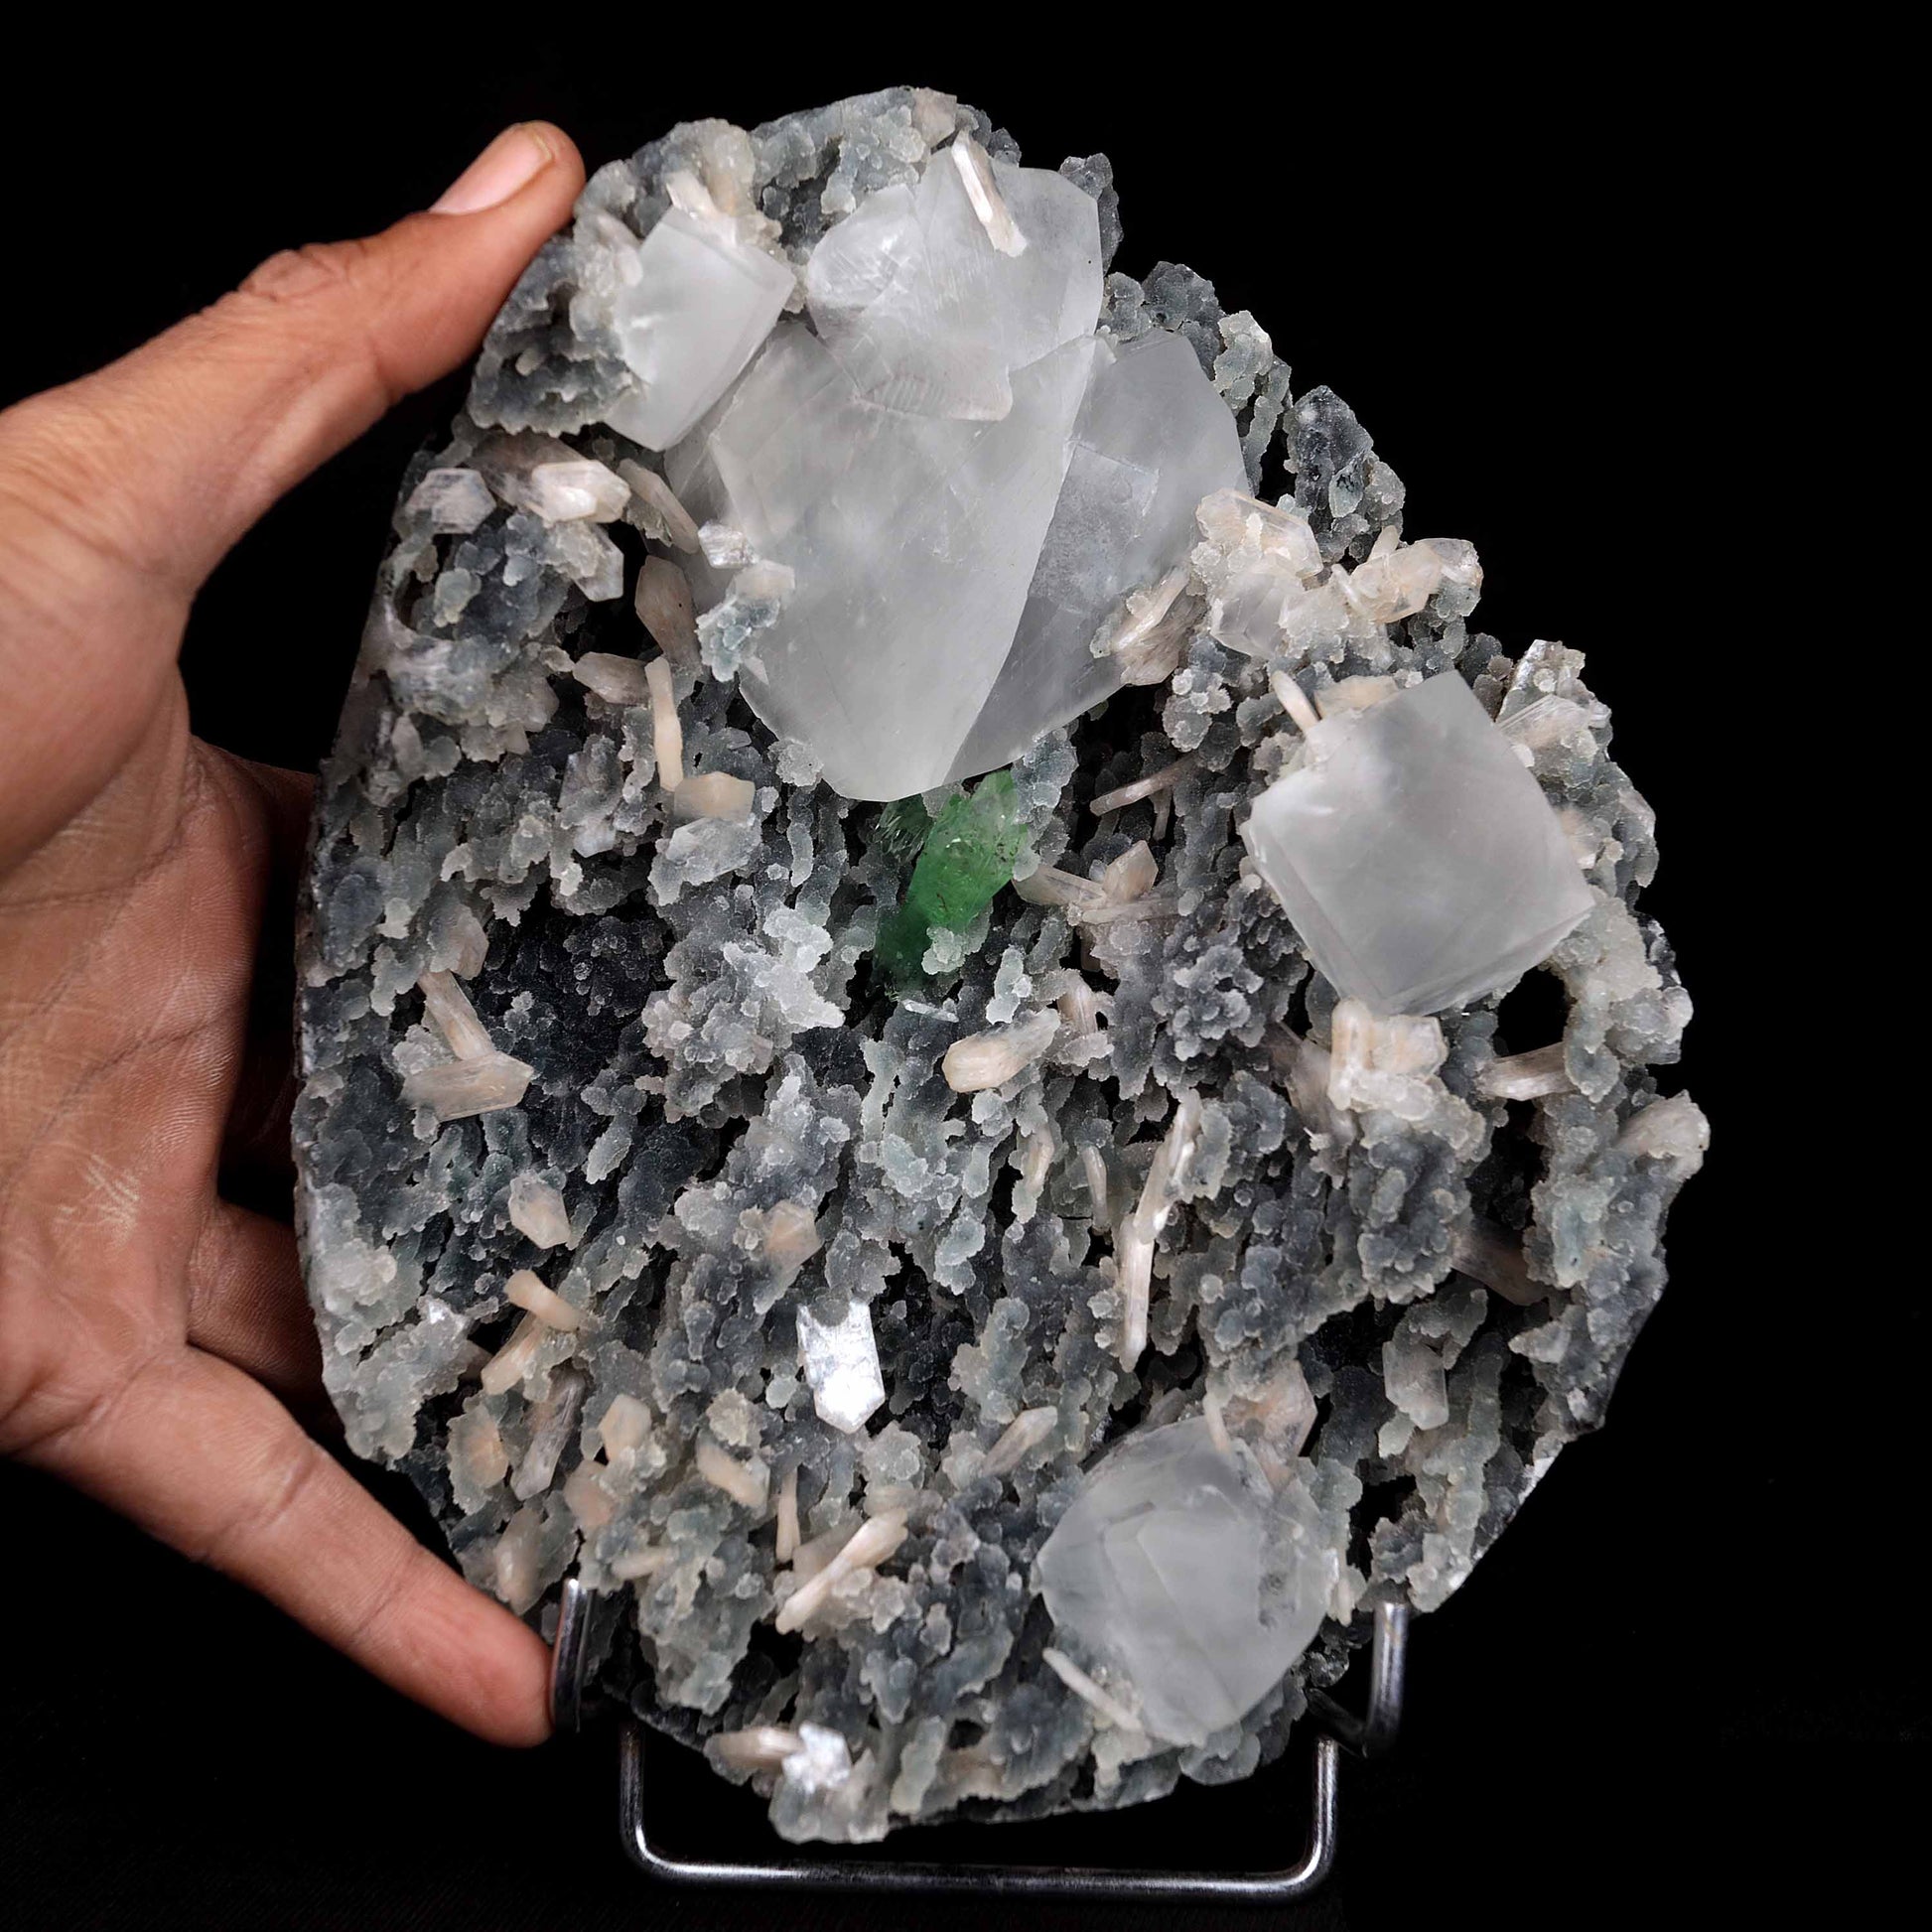 Calcite with Green Apophyllite with Stilbite (Excellent) Vug # B 4228  https://www.superbminerals.us/products/calcite-with-green-apophyllite-with-stilbite-excellent-vug-b-4228  Features:An exceptionally sculptural and impressive large combination zeolite specimen from Aurangabad. The very well prepared deep triangular vug in basalt matrix is lined with sparkly, bubbly, drusy gray chalcedony. The striking and aesthetic mound in the middle hosts pearlescent, flesh-pink, stilbite crystals,